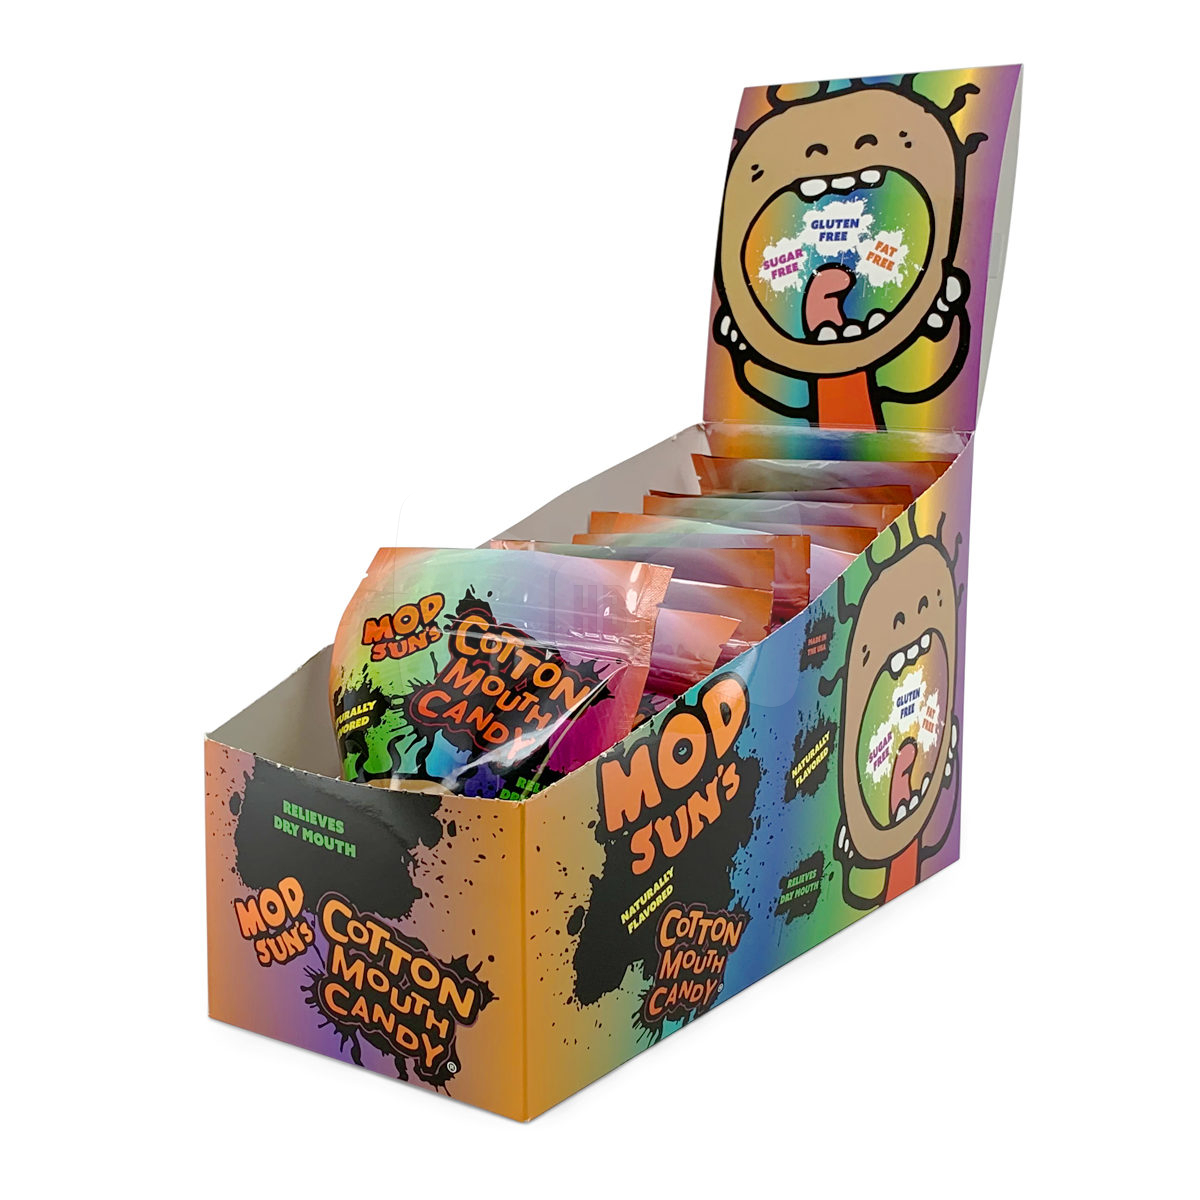 MOD SUN Large Cotton Mouth Candy Bag Full Box (10 packs)